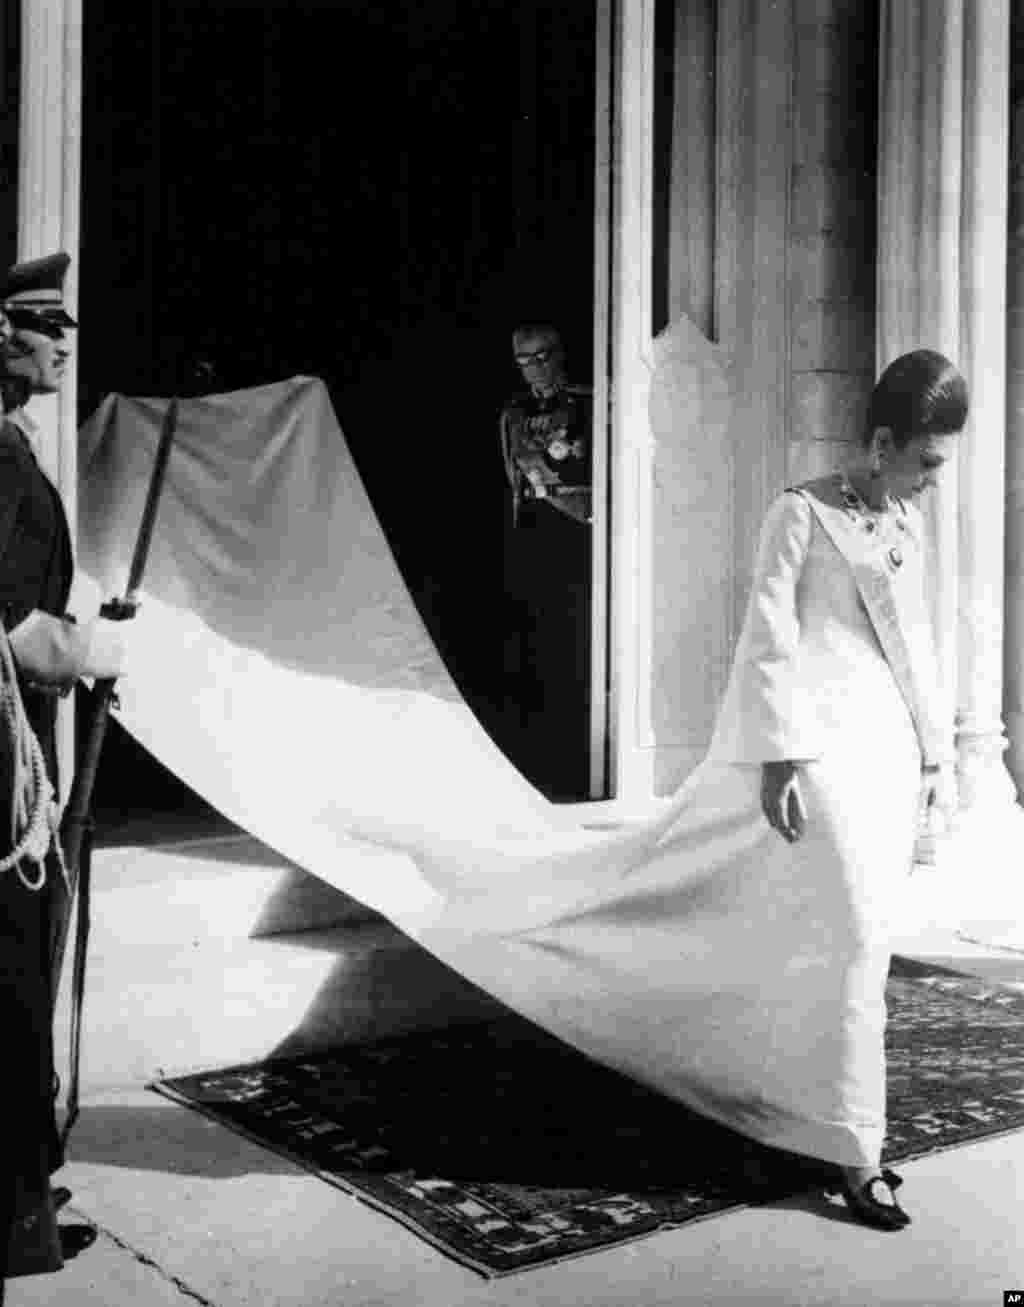 Empress Farah leaves the Marble Palace in Tehran in October 1967 for the coronation procession to the Golestan Palace. Her husband watches from the doorway.